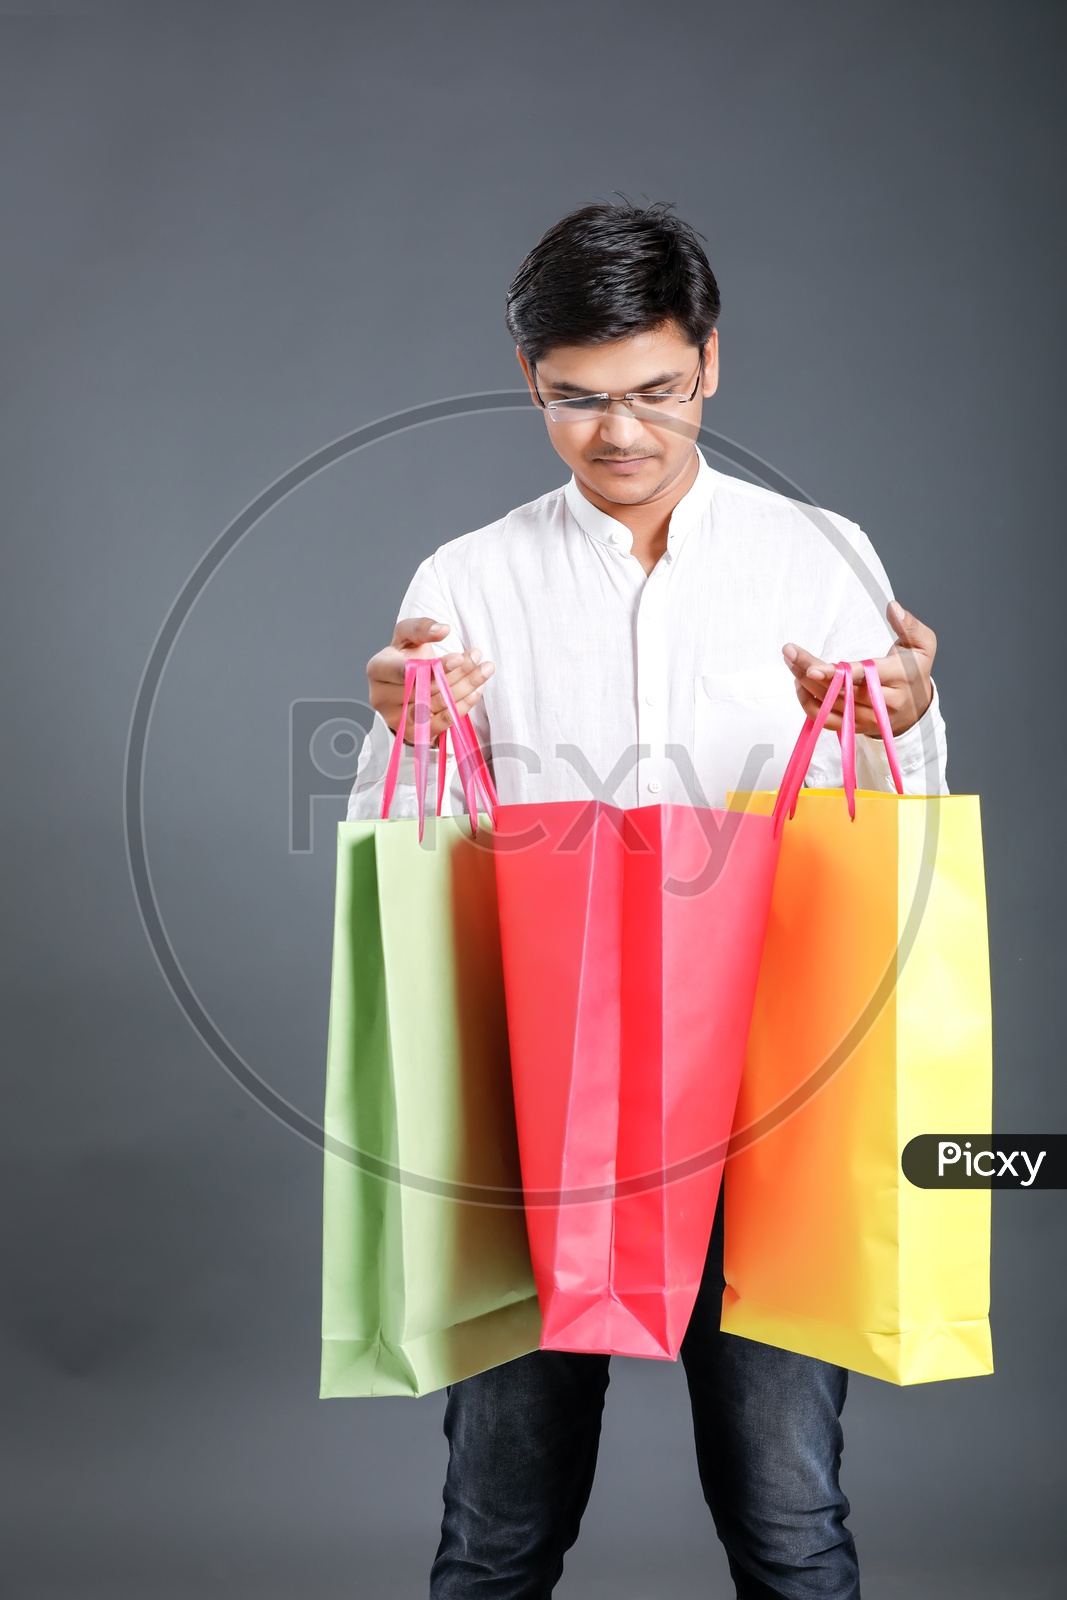 Young Man Carrying  Shopping Bags  And Posing Over an Isolated Black Background